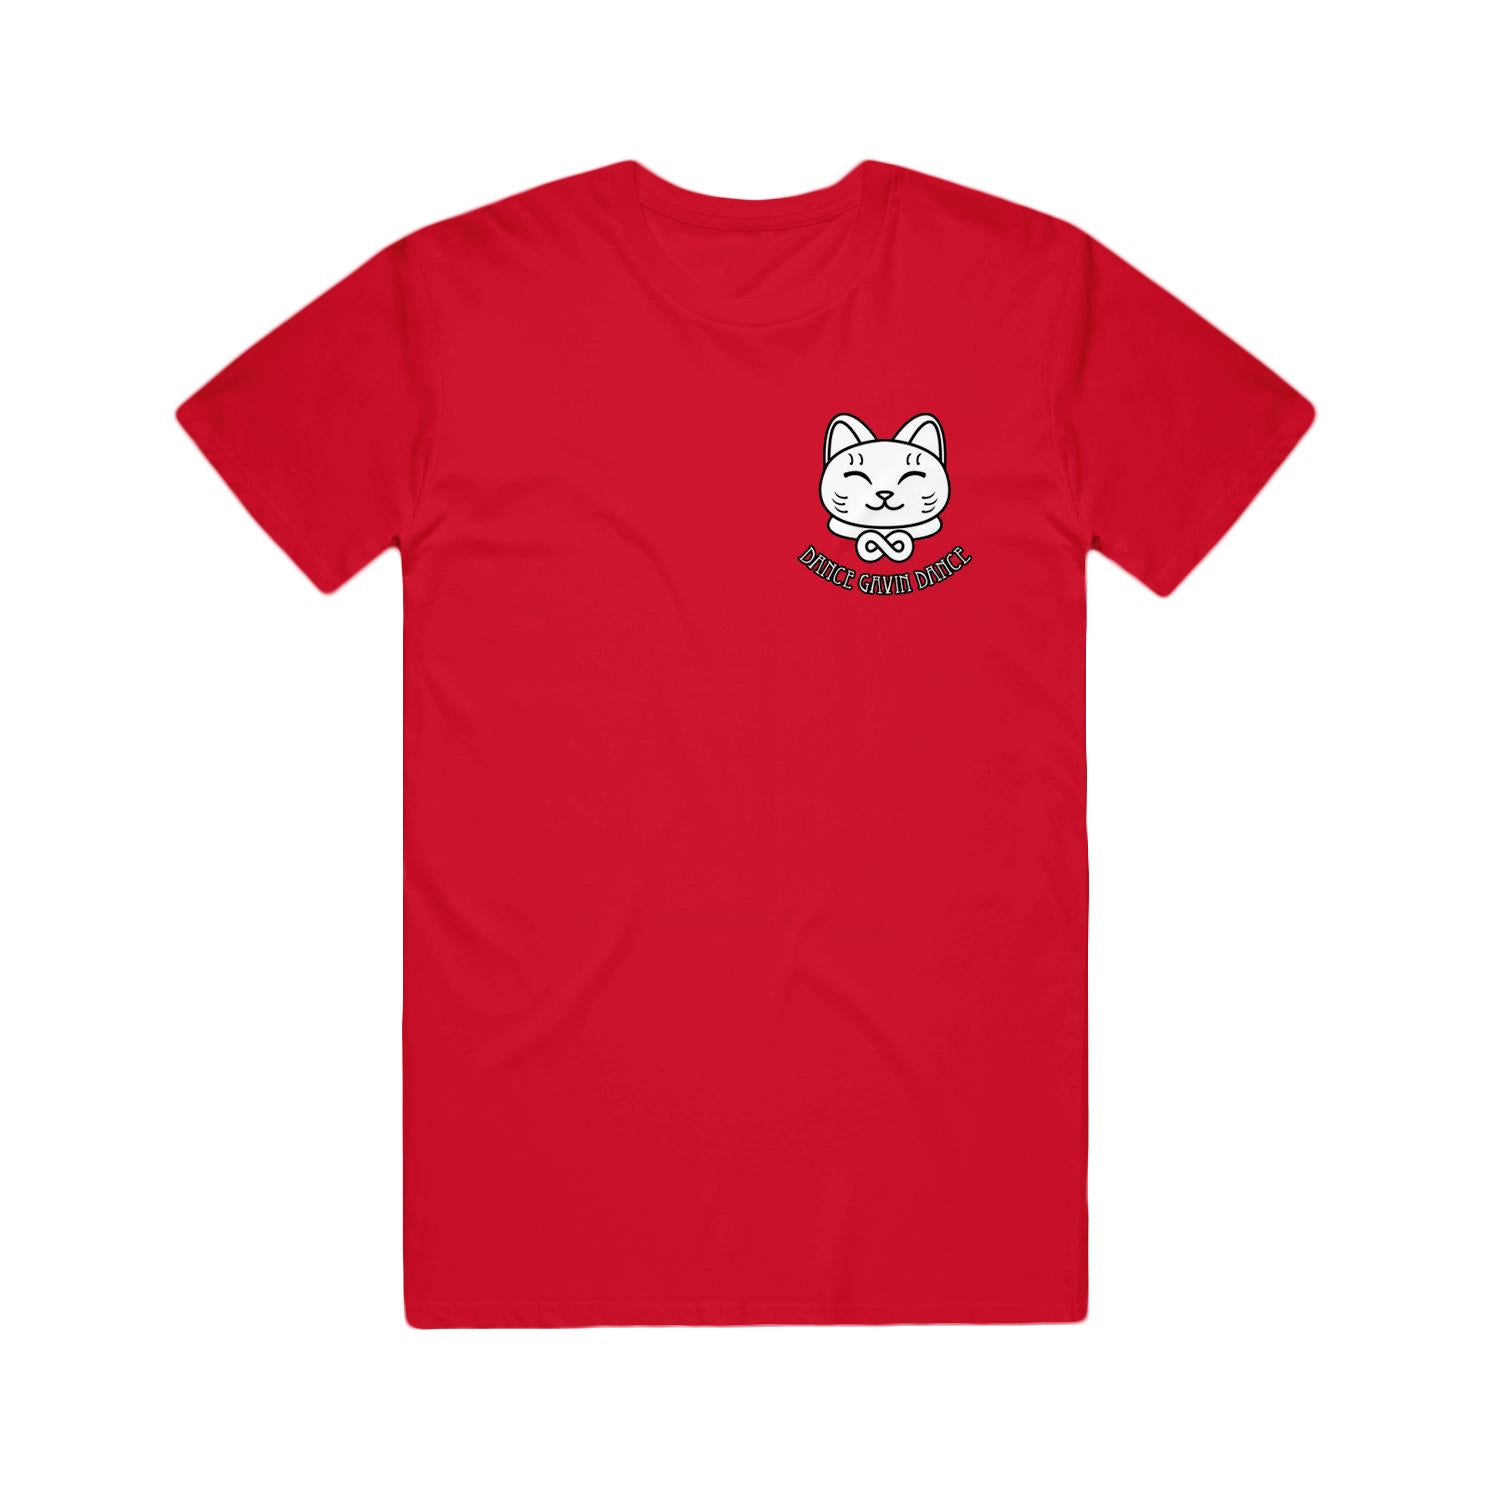 red tee on white background shows left chest print of a cat head in white with dance gavin dance curved up below.